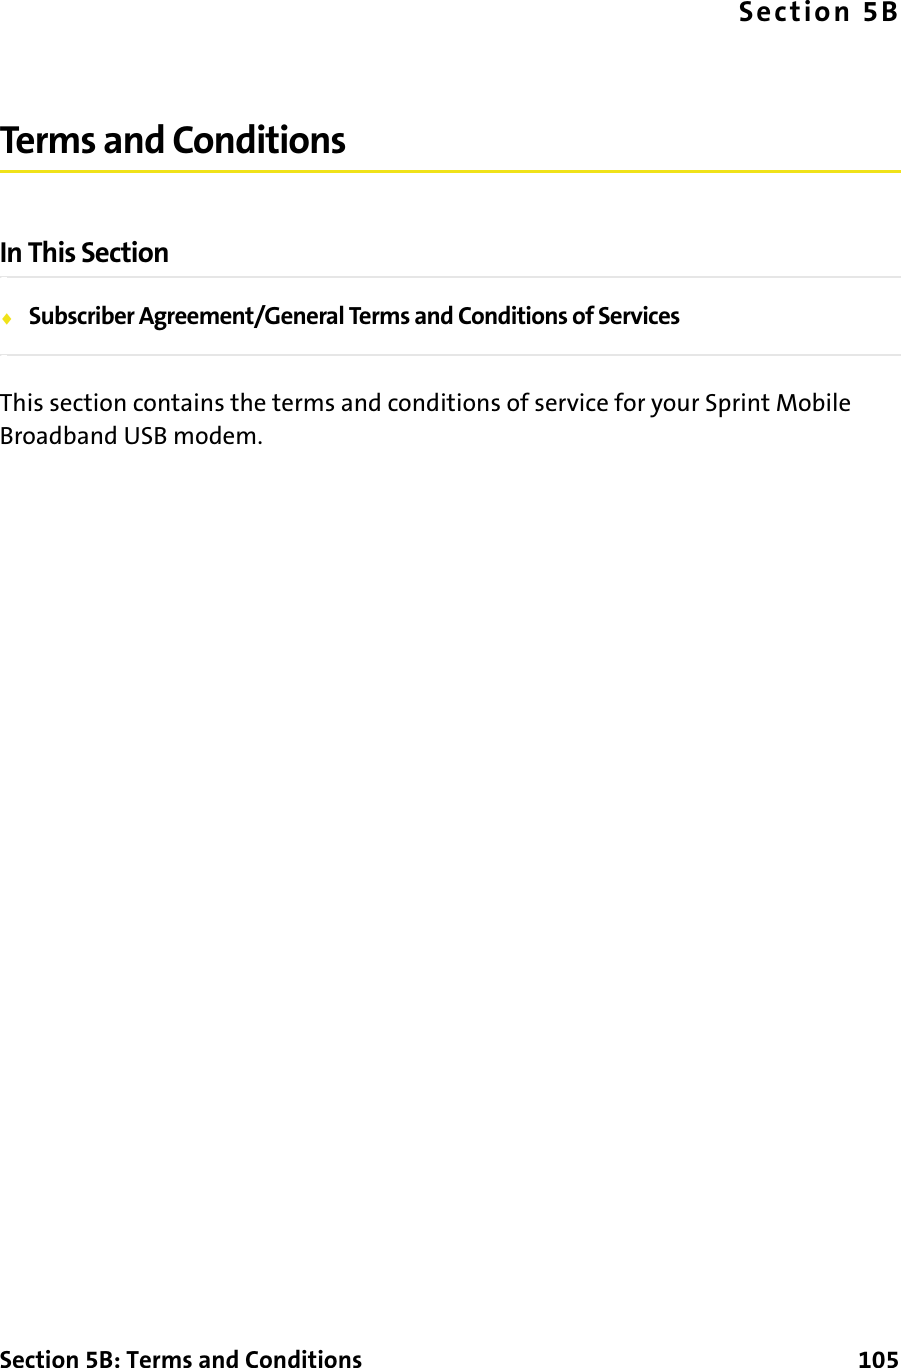 Section 5B: Terms and Conditions      105Section 5BTerms and ConditionsIn This Section⽧Subscriber Agreement/General Terms and Conditions of ServicesThis section contains the terms and conditions of service for your Sprint Mobile Broadband USB modem.